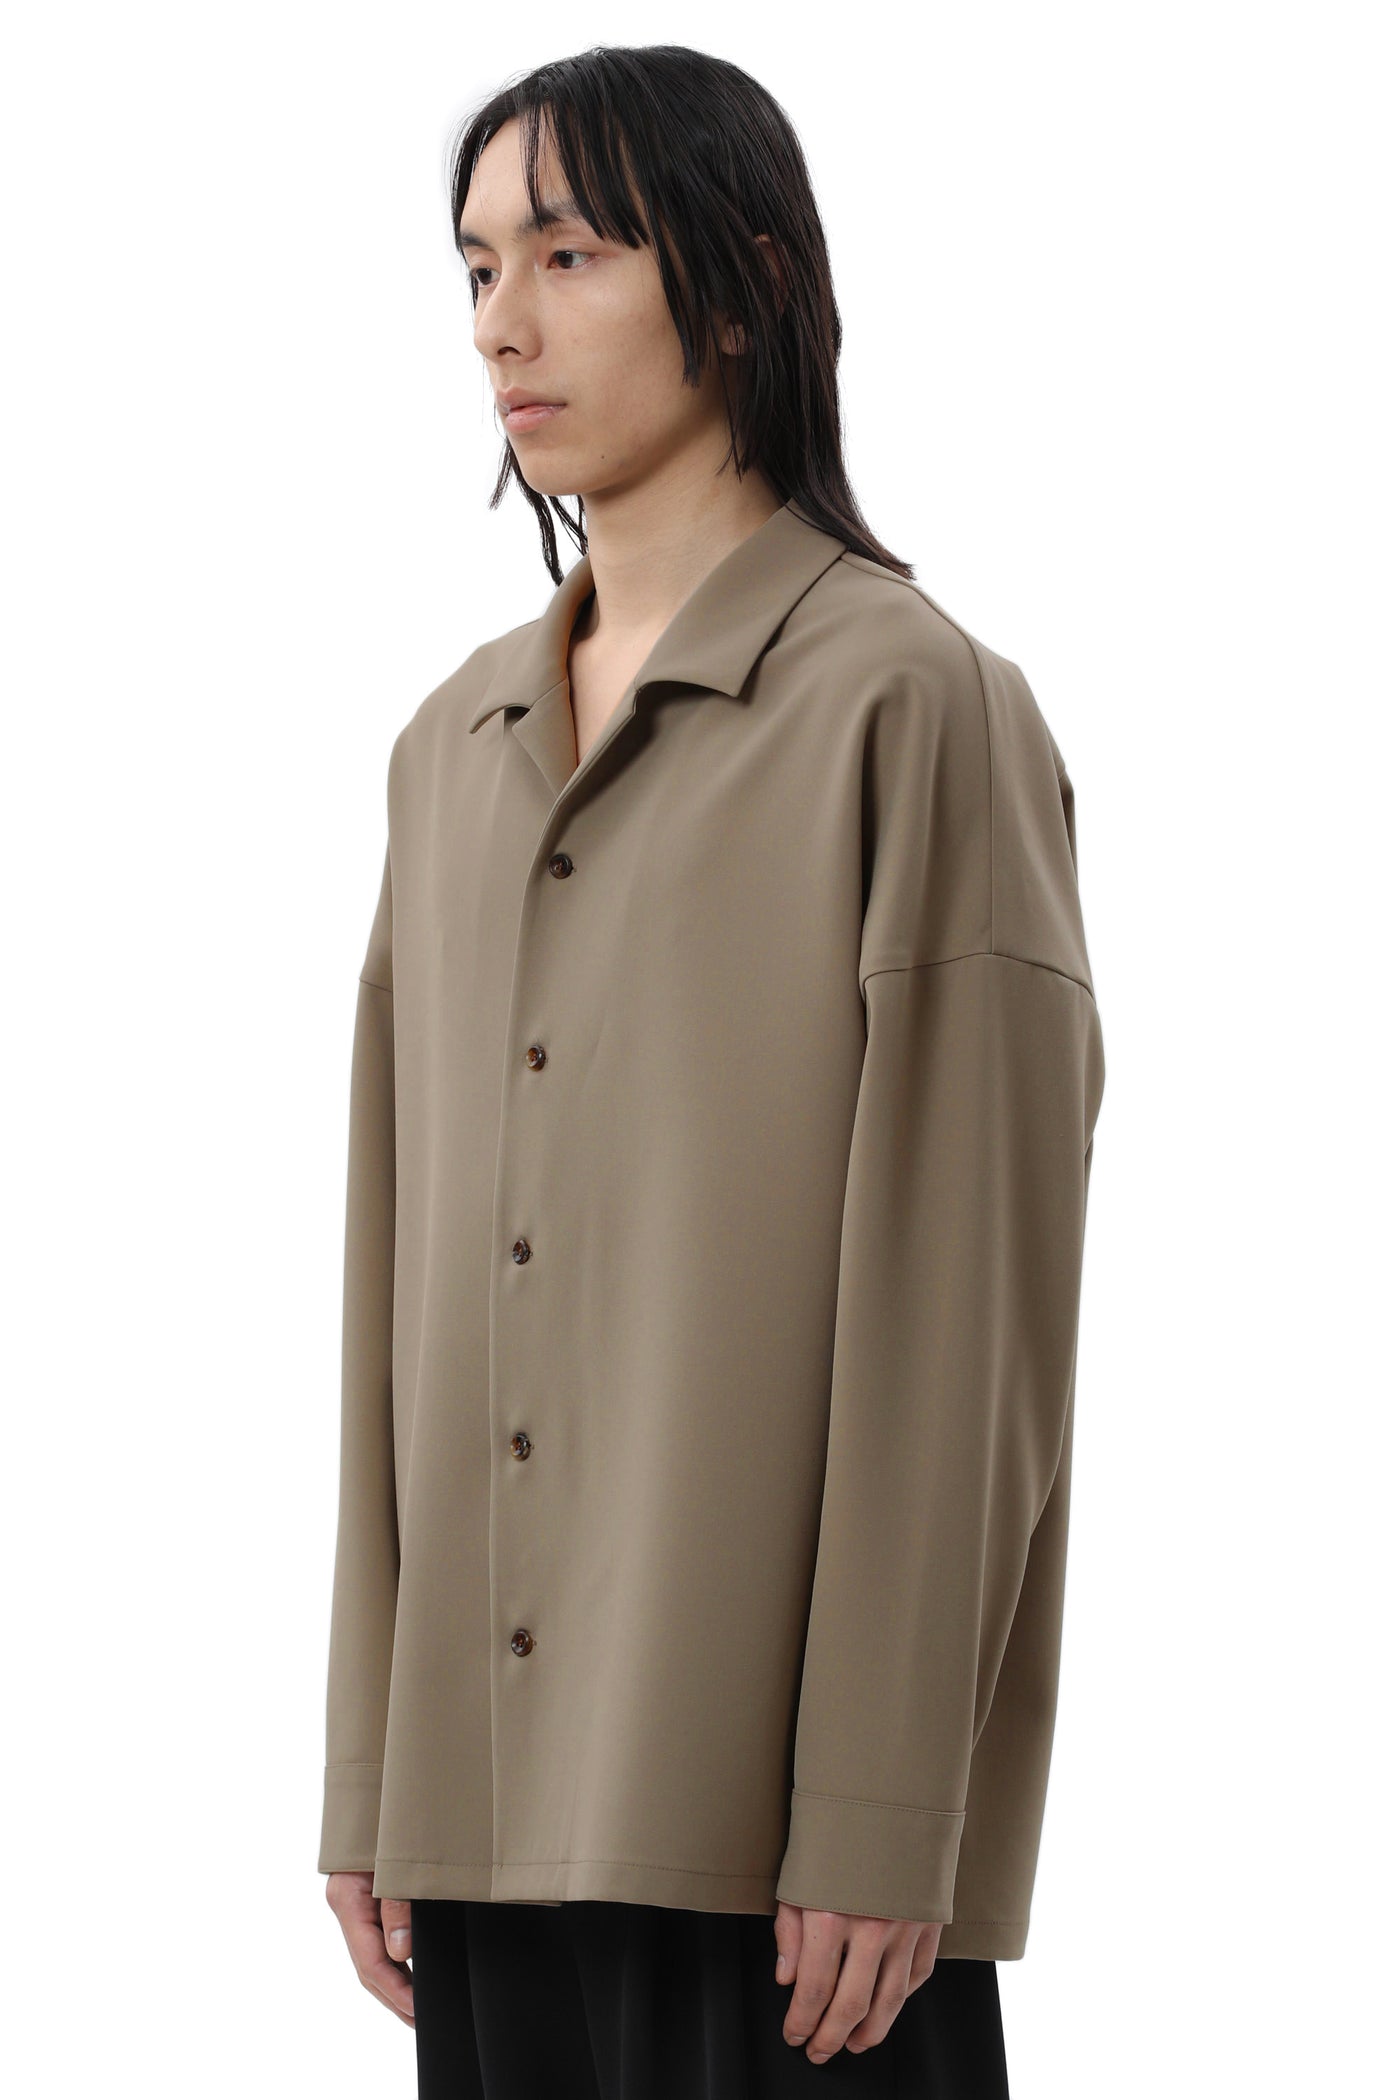 AS22-025 PE STRETCH DOUBLE CLOTH OPEN COLLAR L/S SHIRT